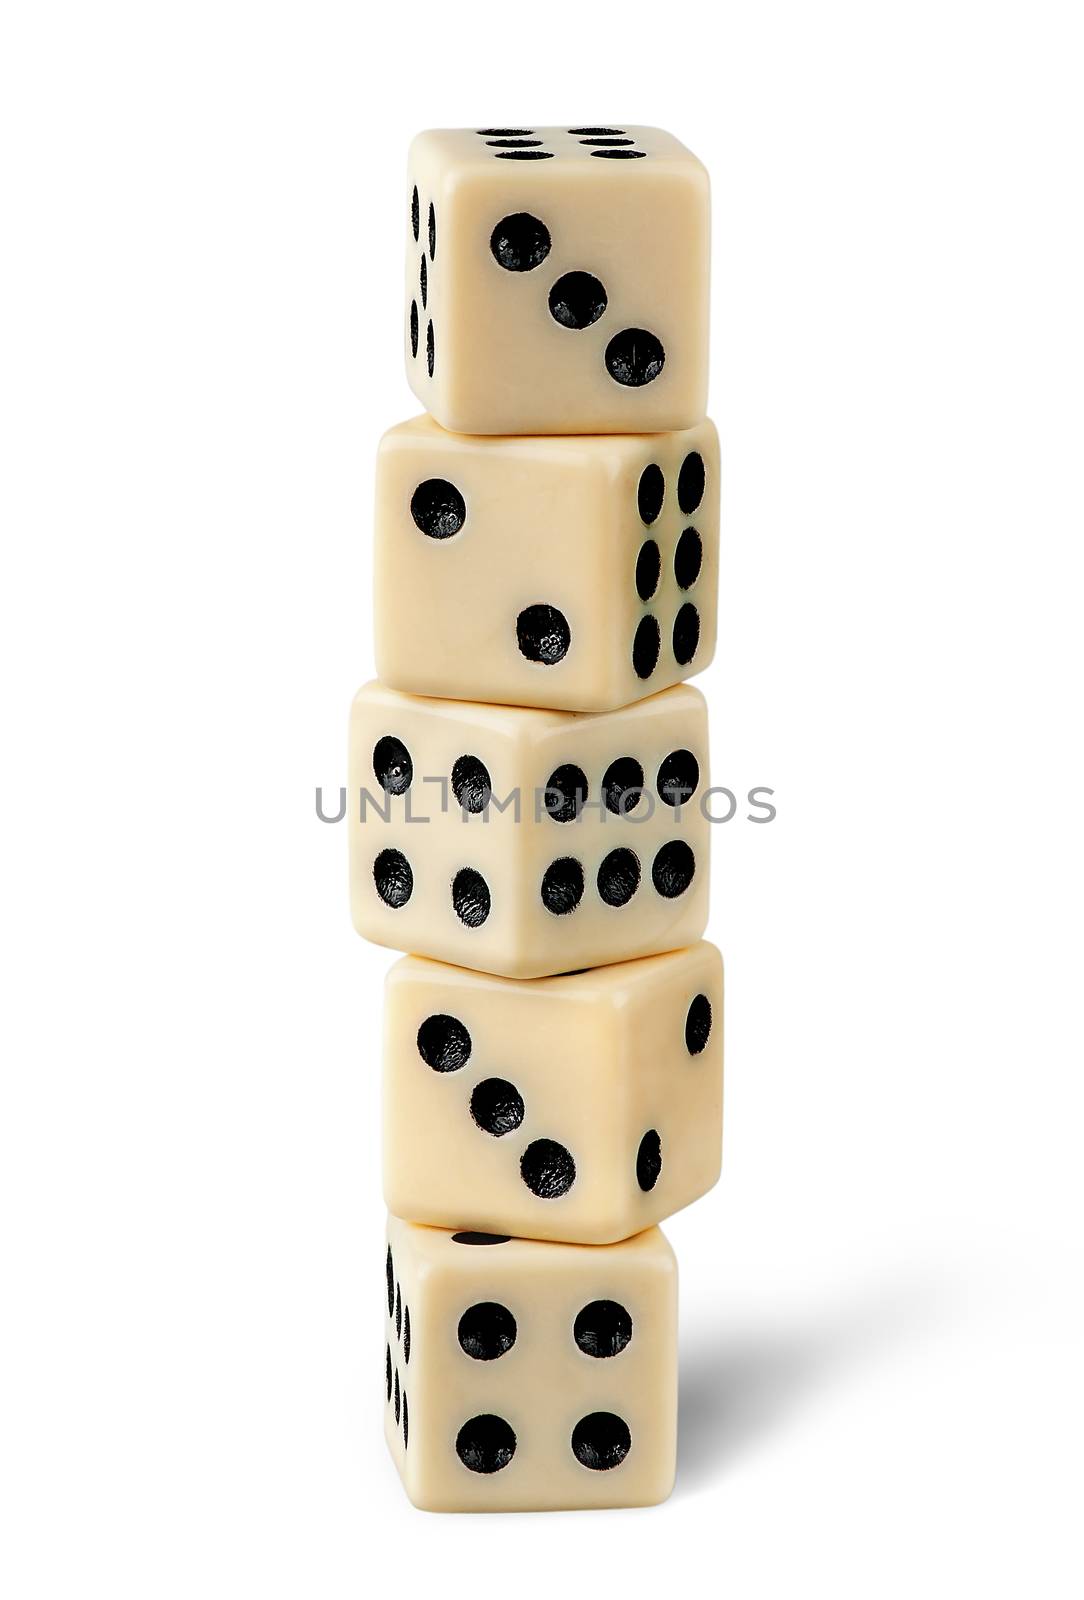 Five gaming dice isolated on white background